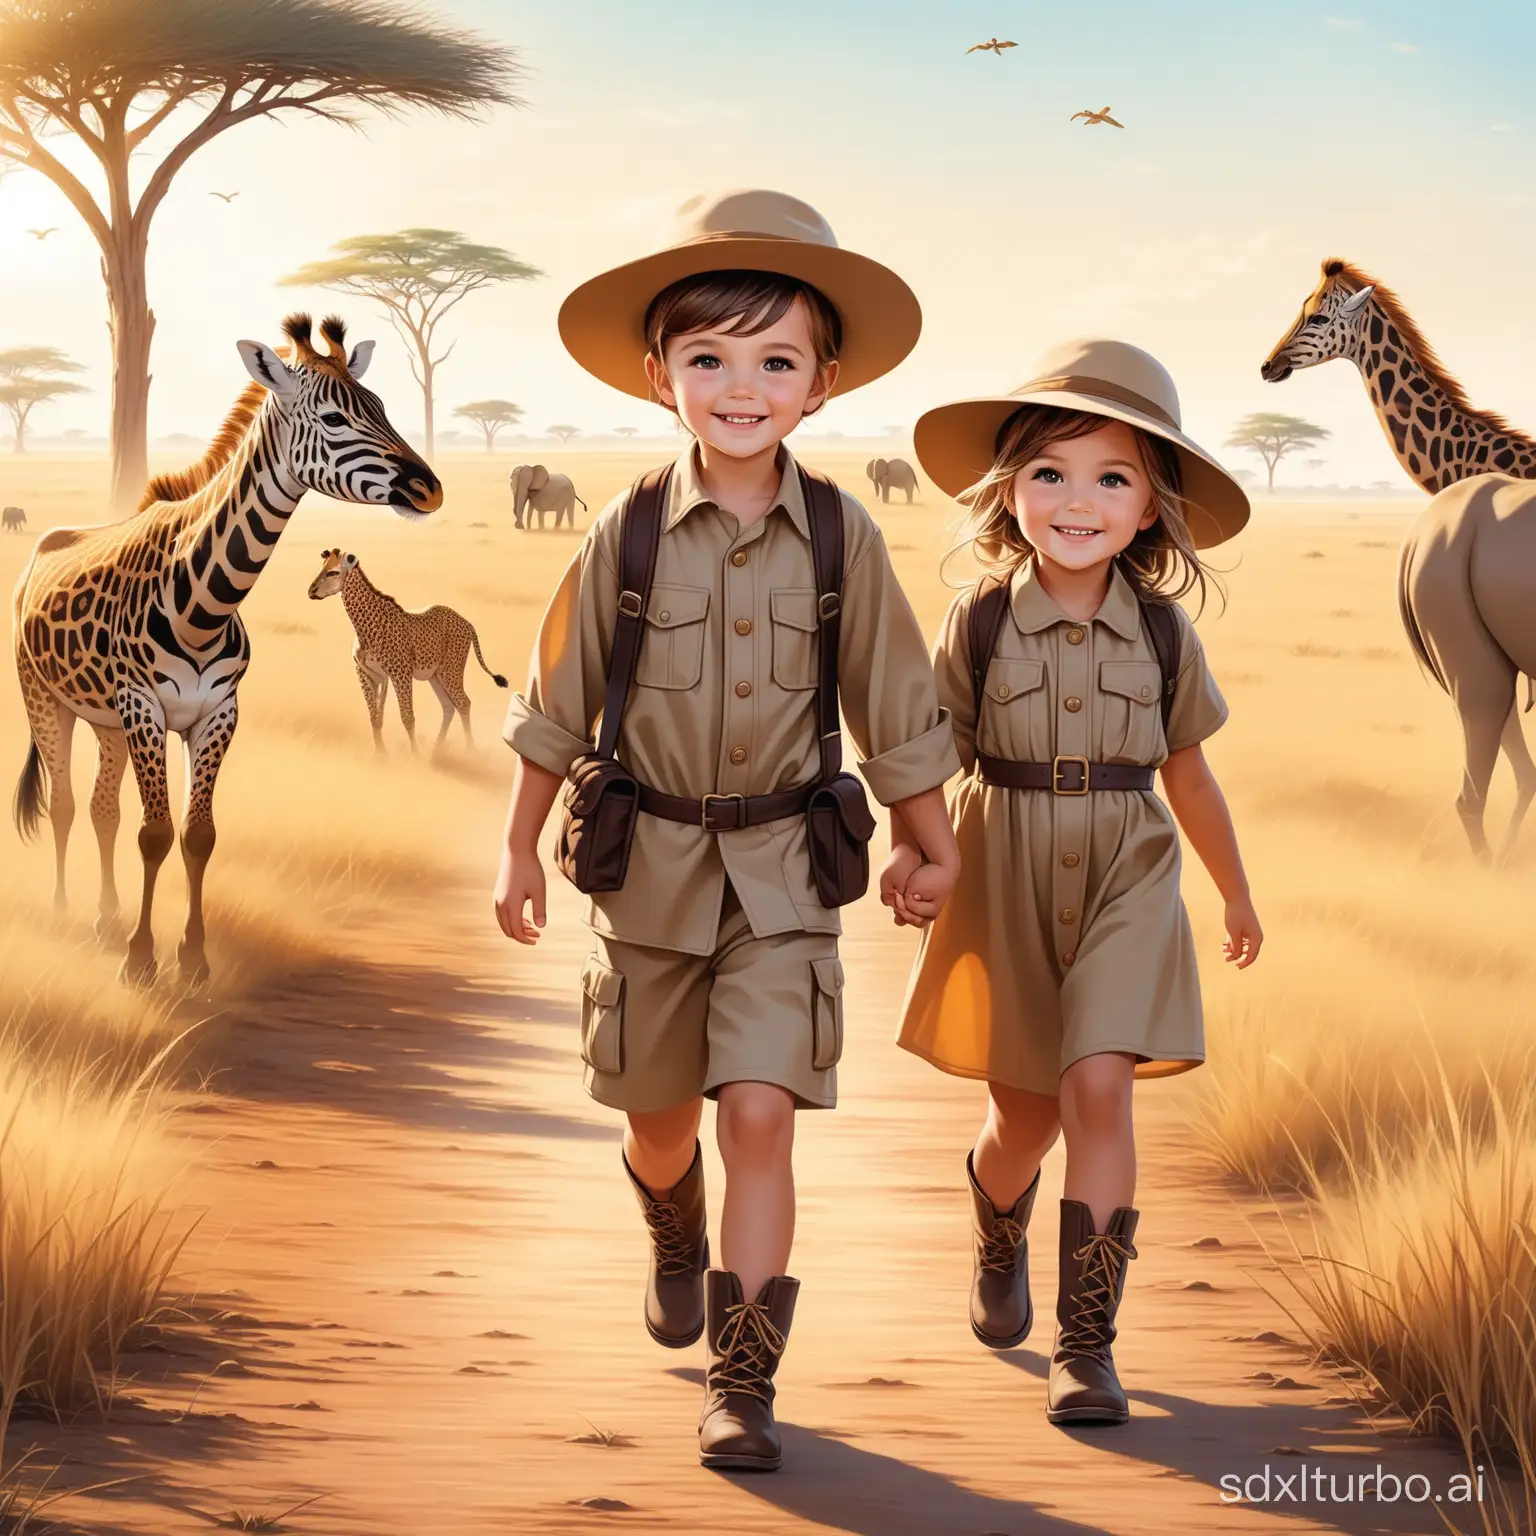 A cute little boy and a little girl in traveler costumes, safari, boots and hat, strolling through the savannah, smiling at the camera. Animals are depicted behind them in a photorealistic style.